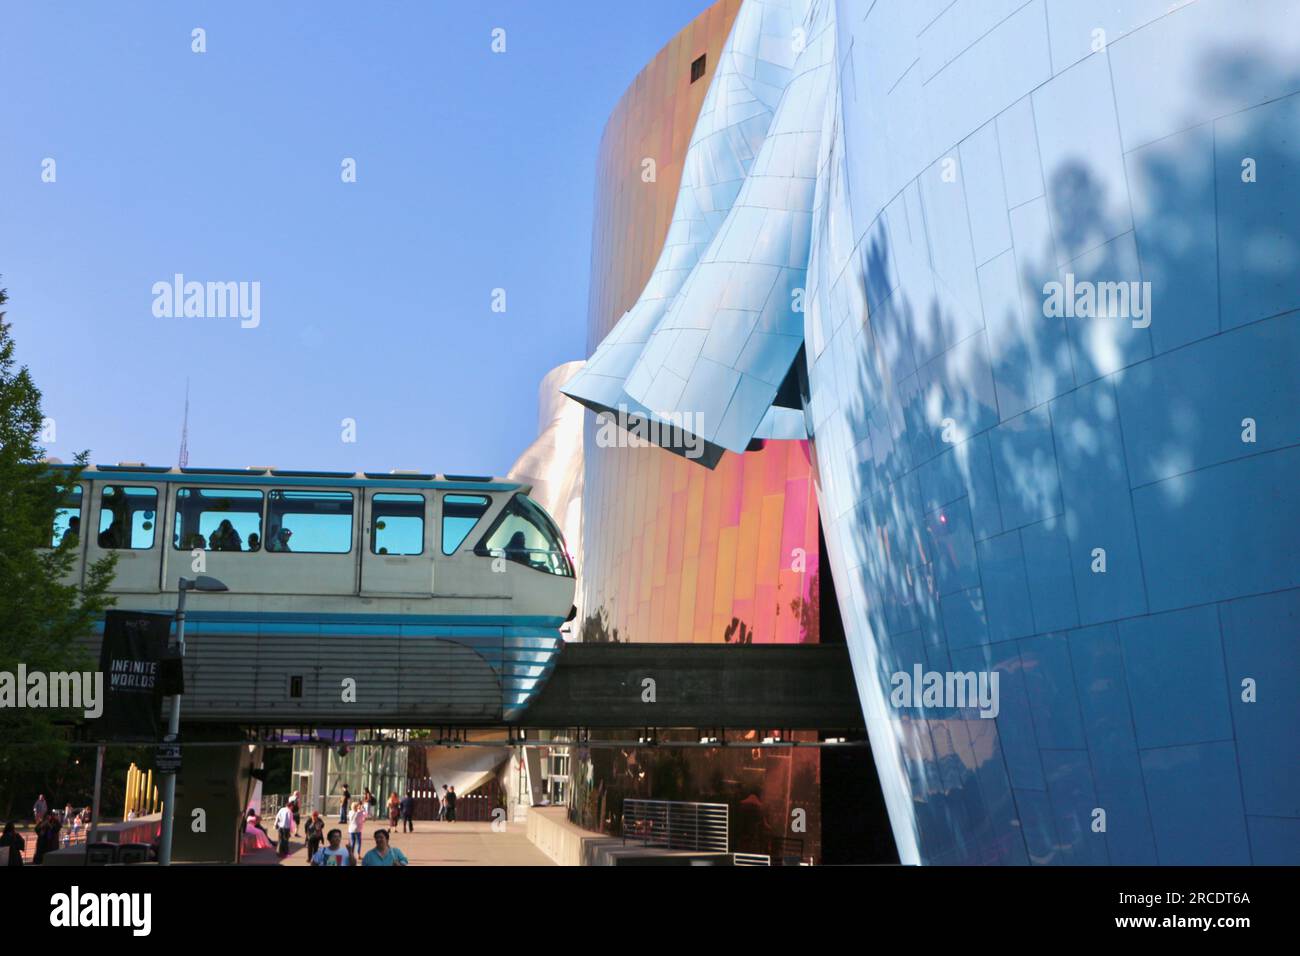 Museum of Pop Culture modern architecture building with the Seattle Centre Alweg Monorail train running through it Seattle Washington State USA Stock Photo